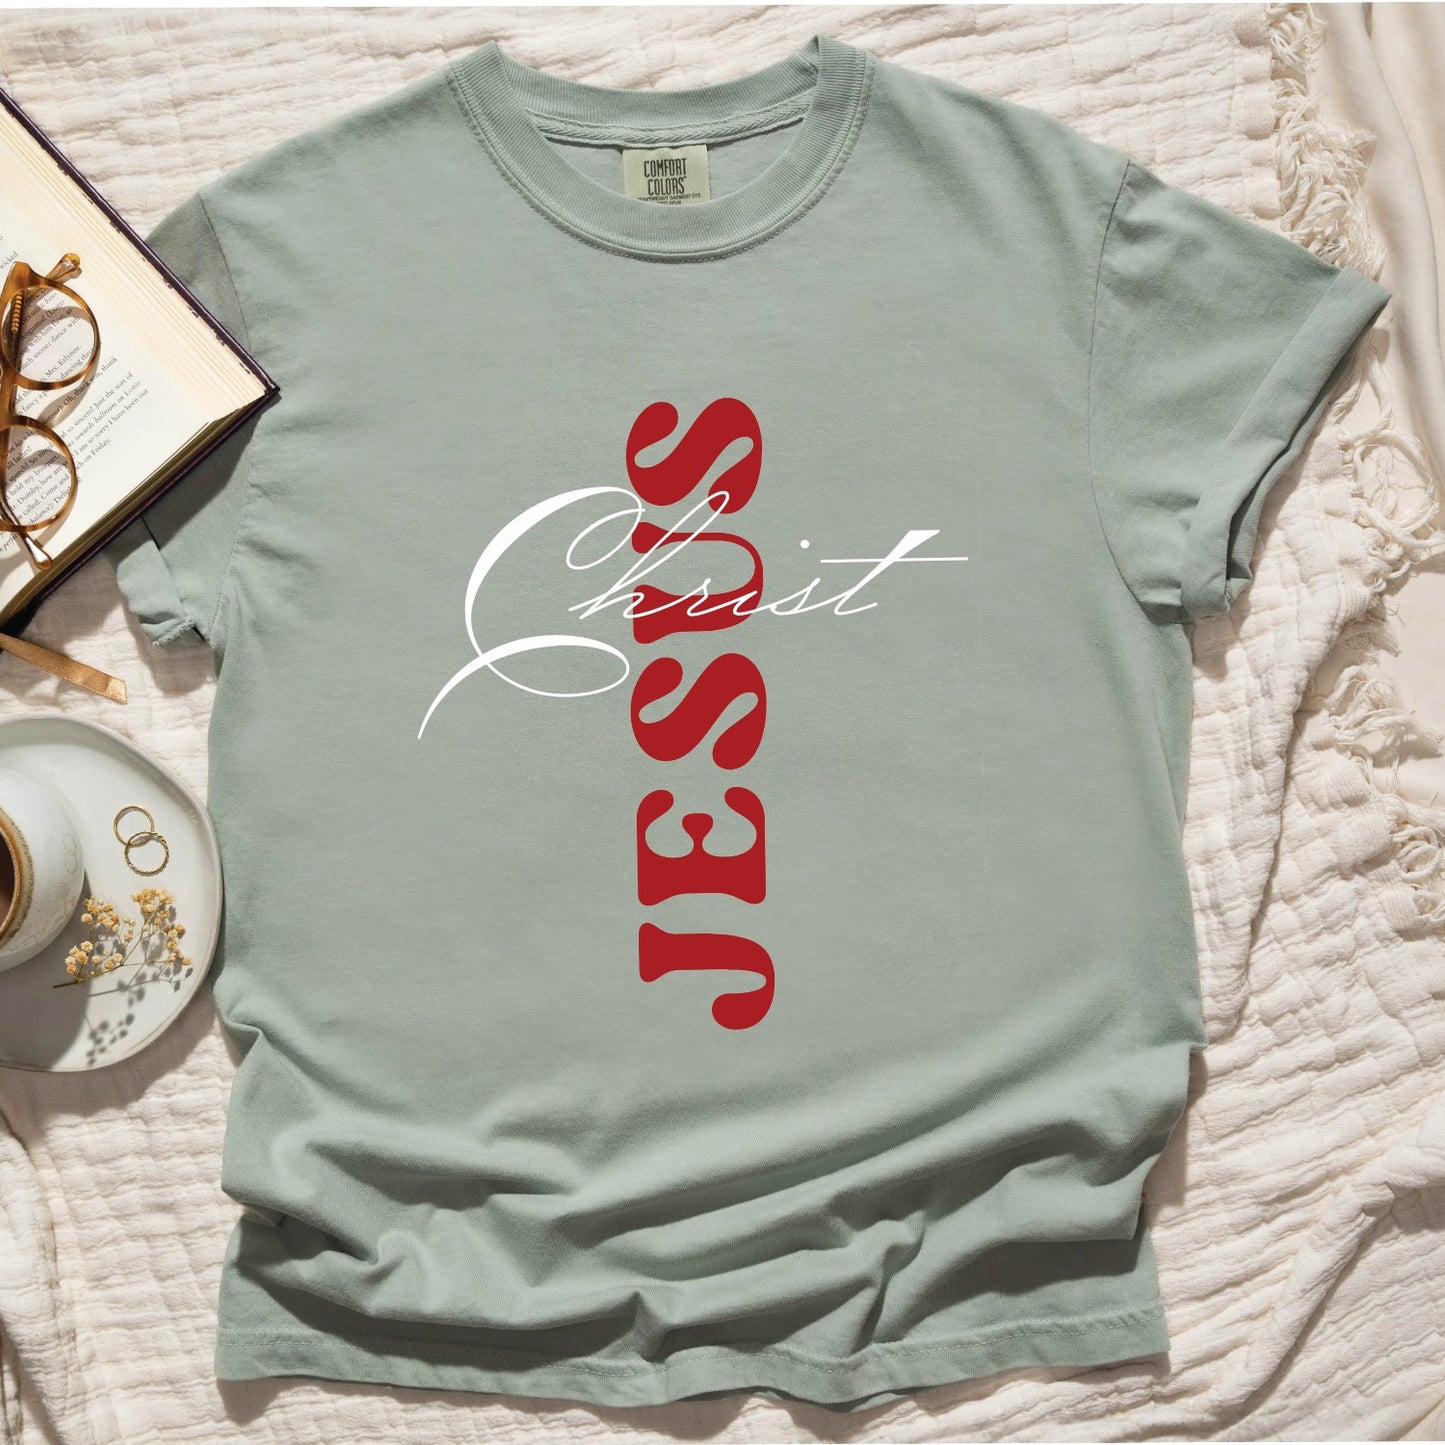 Bay sage green color Christian Comfort Colors 1717 heavyweight unisex t-shirt with faith-based bible typography that says, "Jesus Christ" and white and red letters in the shape of the cross, created for men and women Kingdom believers